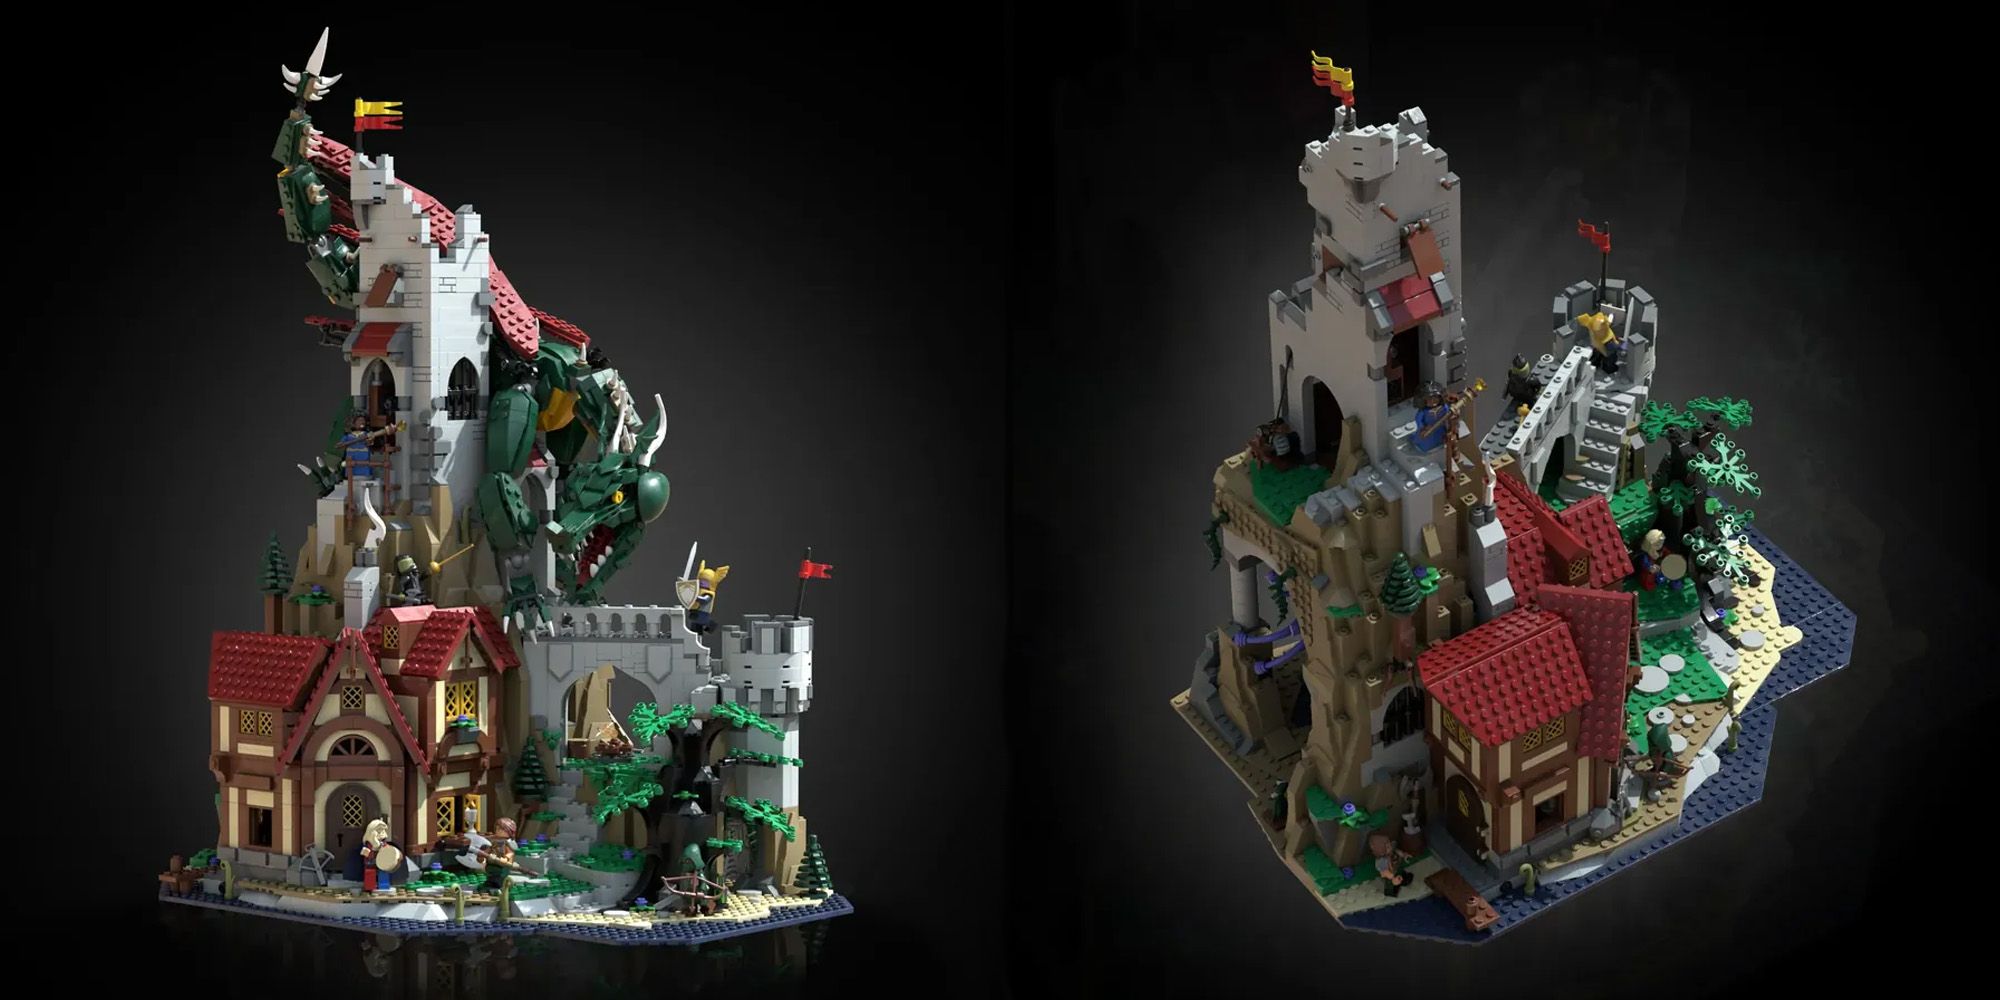 Side by side images of a D&D LEGO set with a tower, tavern, and dragon.